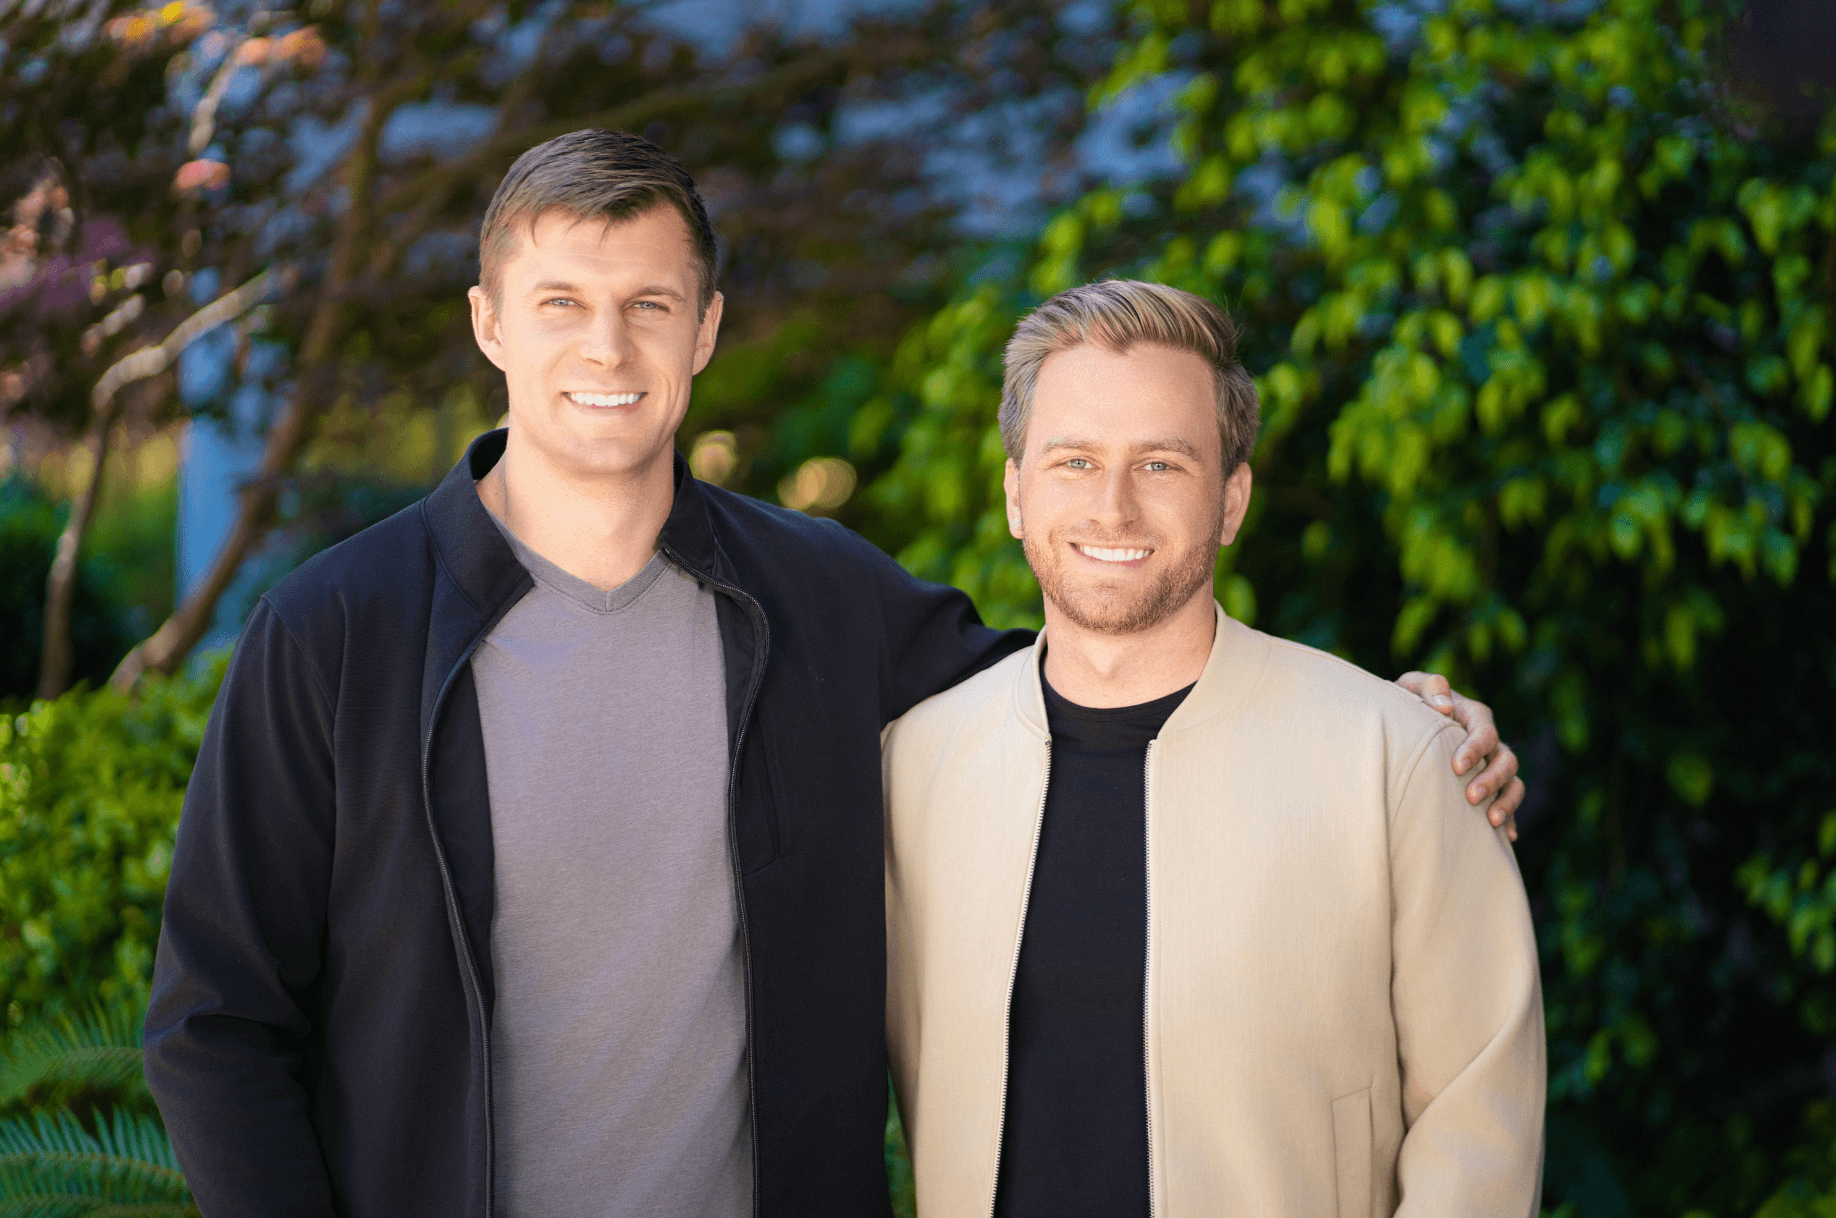 resources PearX S19 alum Learn to Win raises $30M to continue helping large clients use data analytics and AI to improve training and onboarding